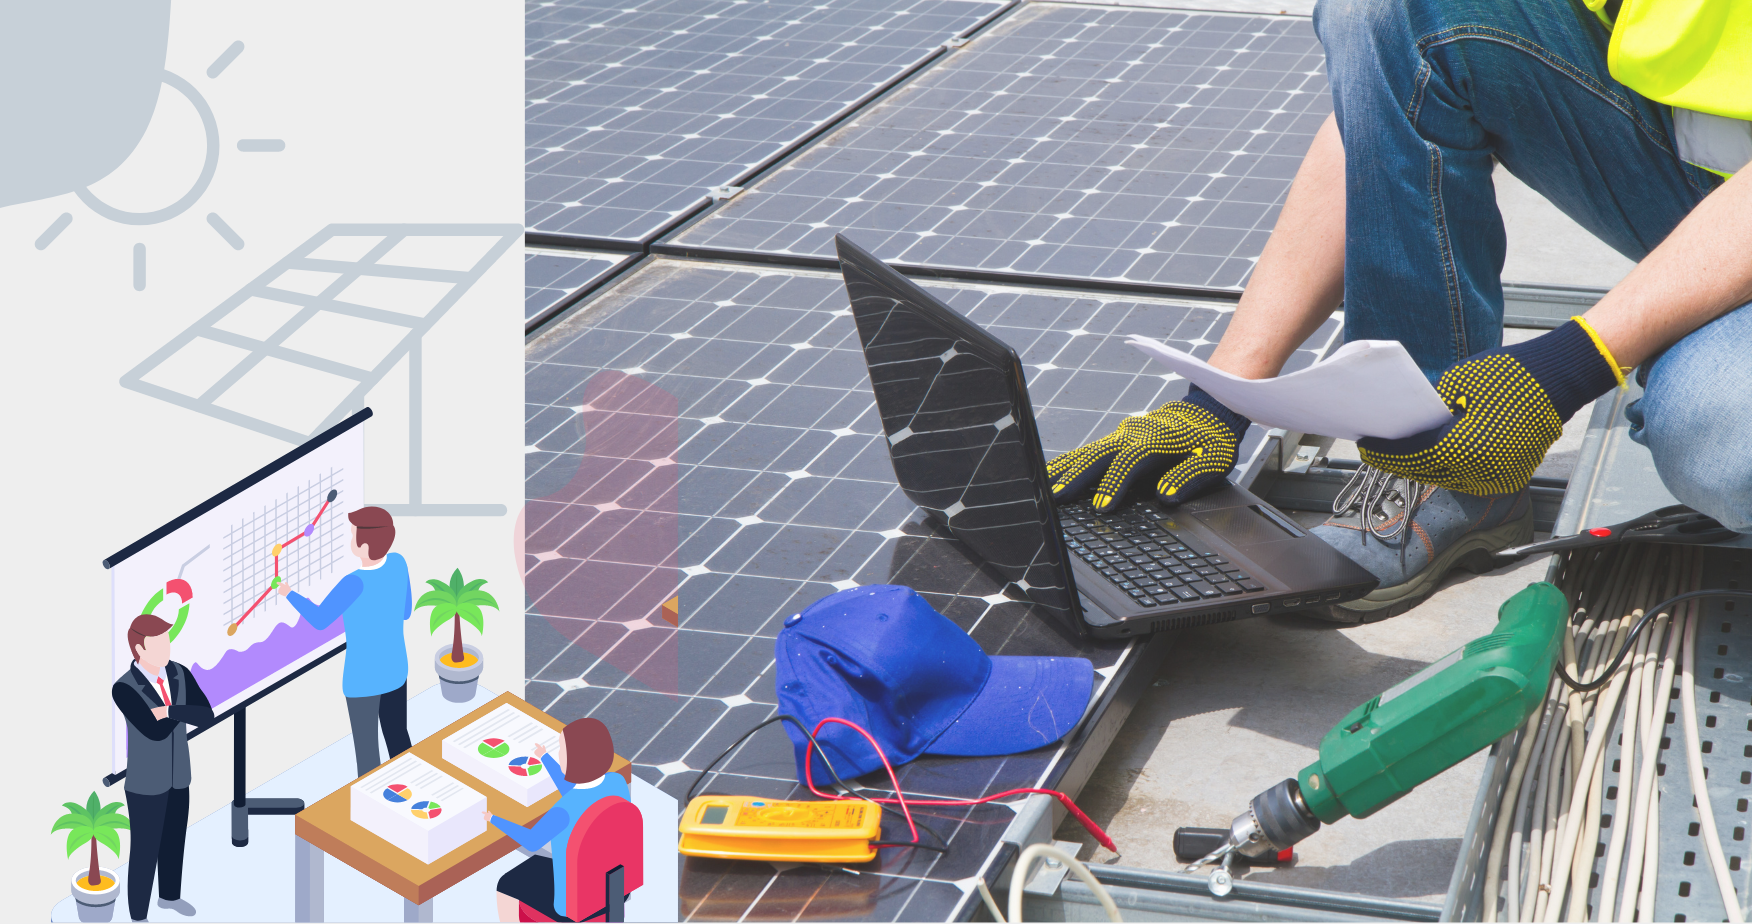 Technical audit and diagnostic performance and maintenance of photovoltaic solar park